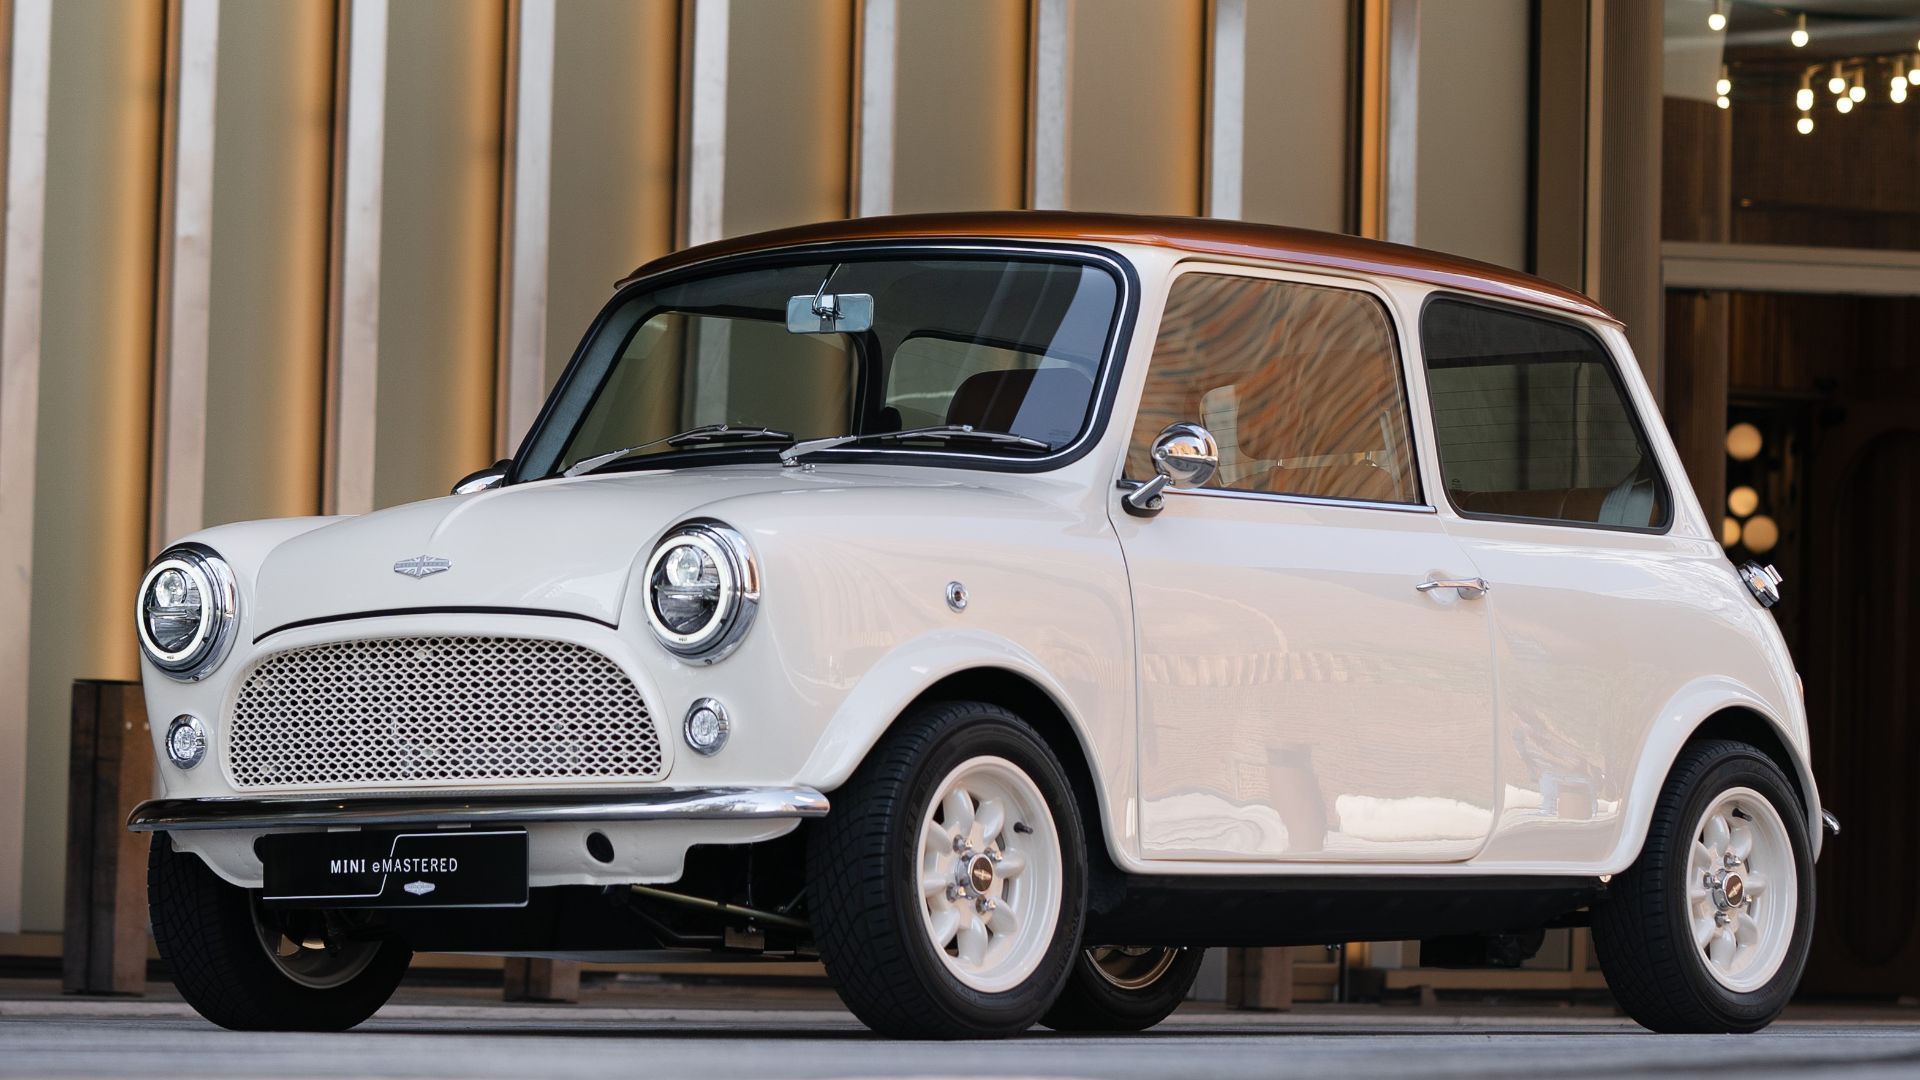 Driving The Mini eMastered, The Ultimate Eye Candy City Car